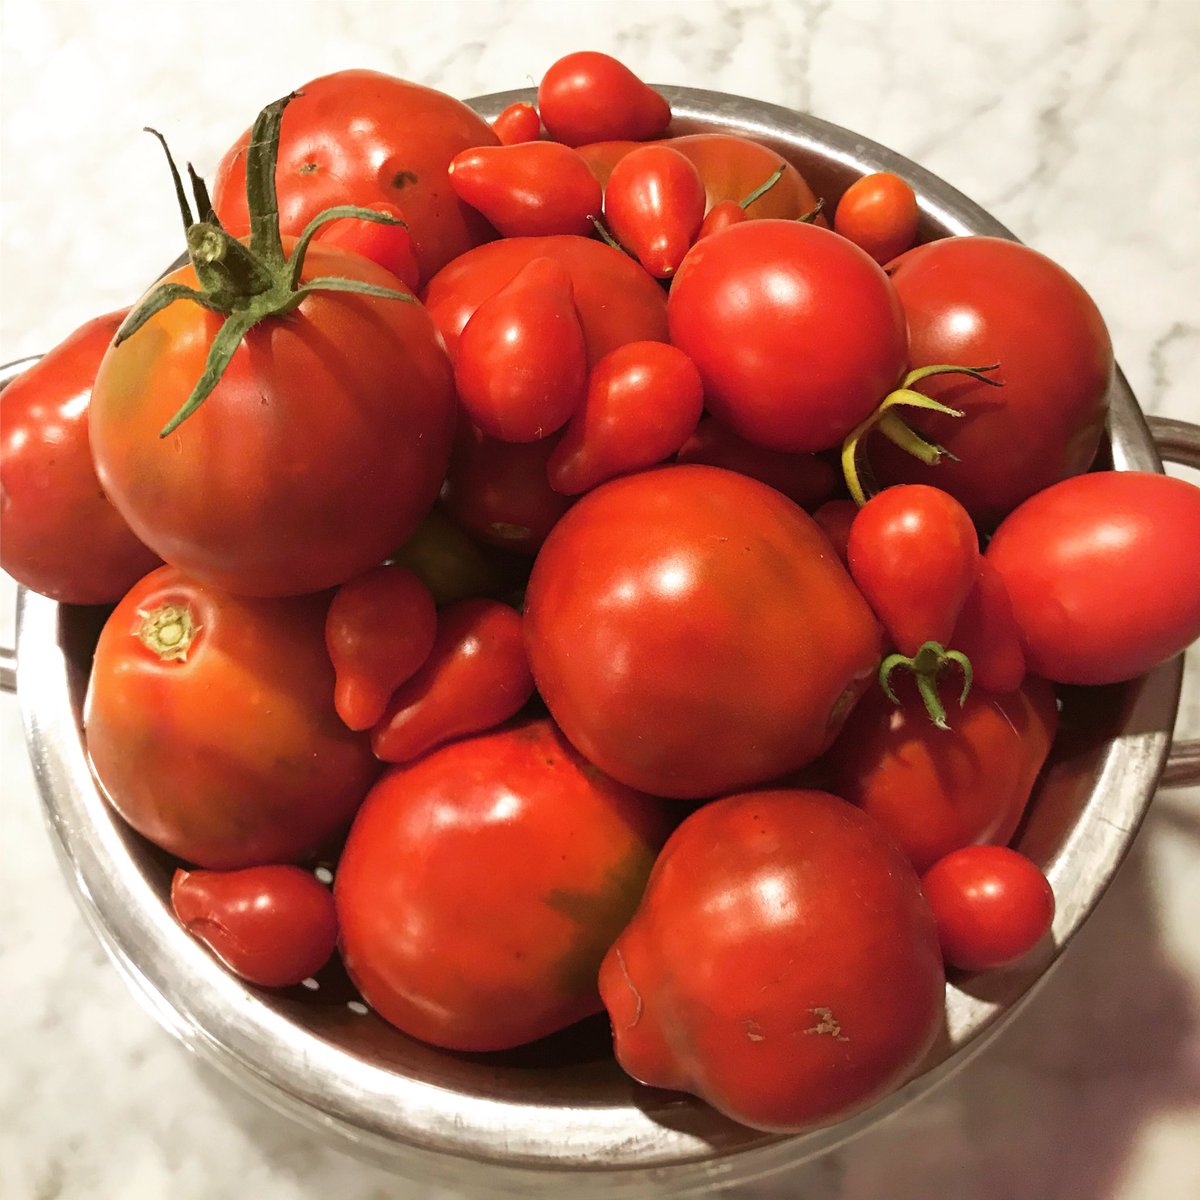 More summer tomatoes. I’ve full up on tomato sauce and roasted tomatoes. Other ideas? #tomatorecipes #potagergarden